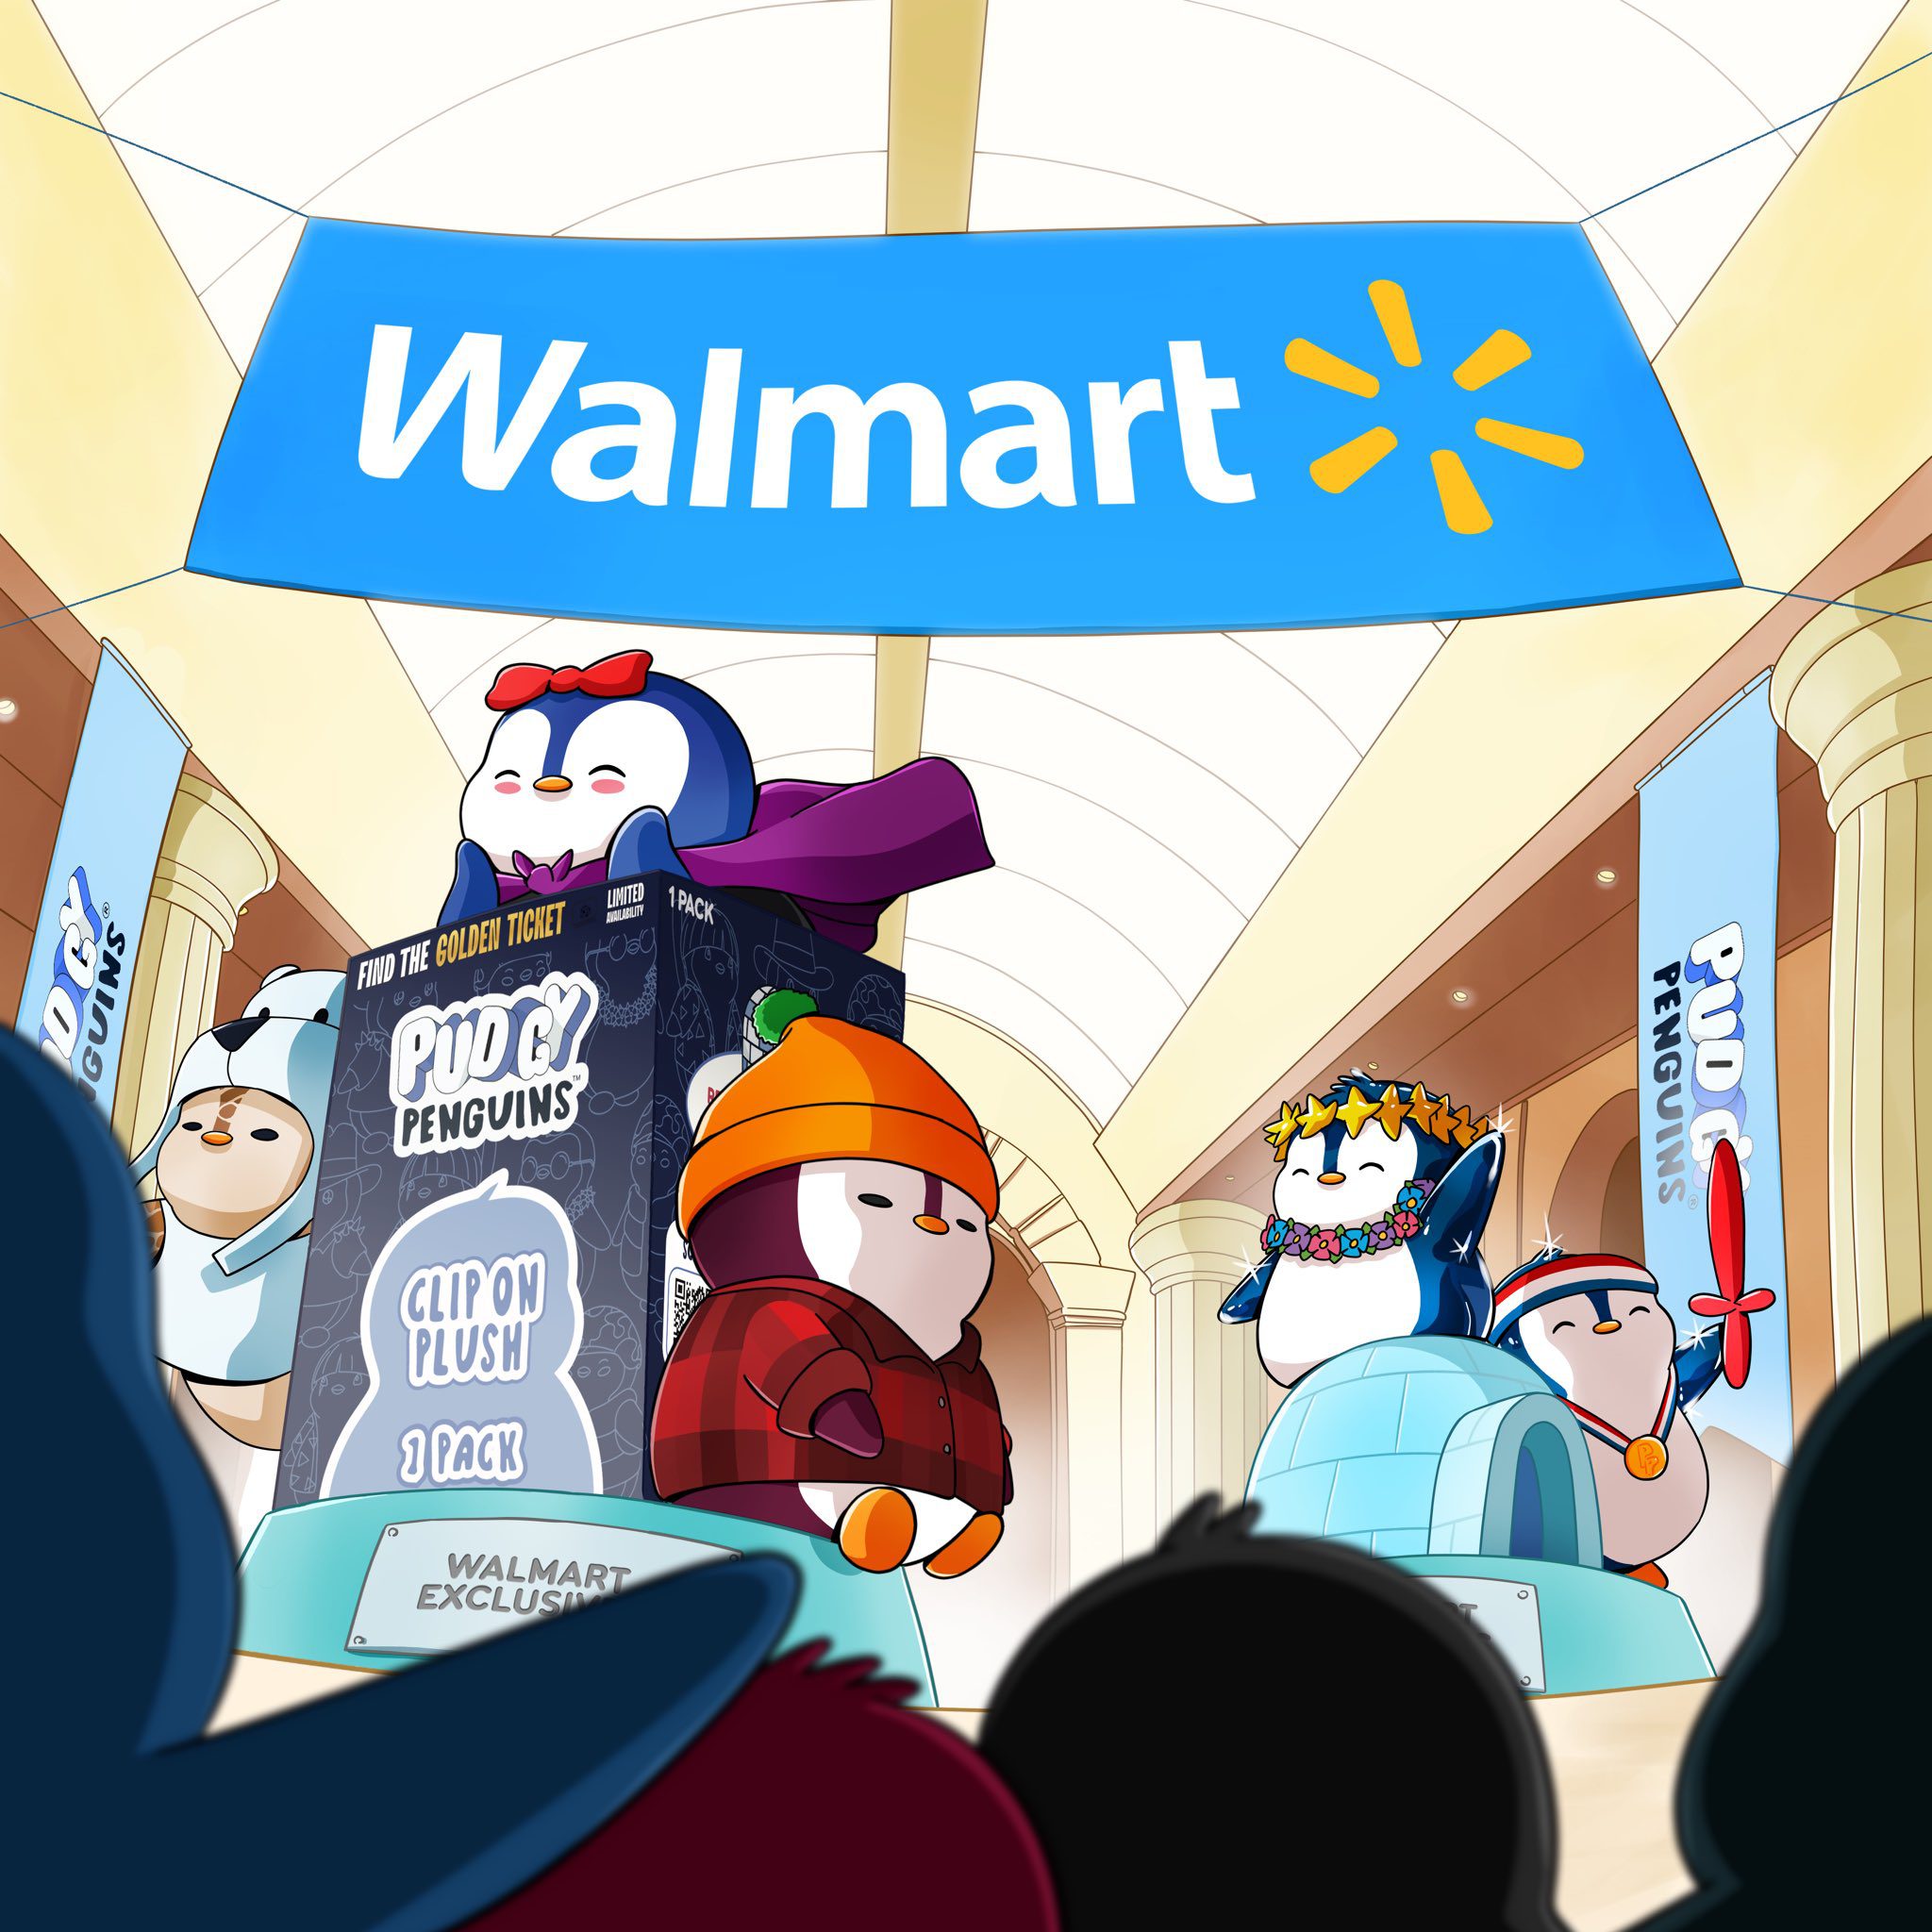 Pudgy Penguins NFT Brand Takes Flight in Walmart Stores: A Physical Toy Line Meets Digital Experience